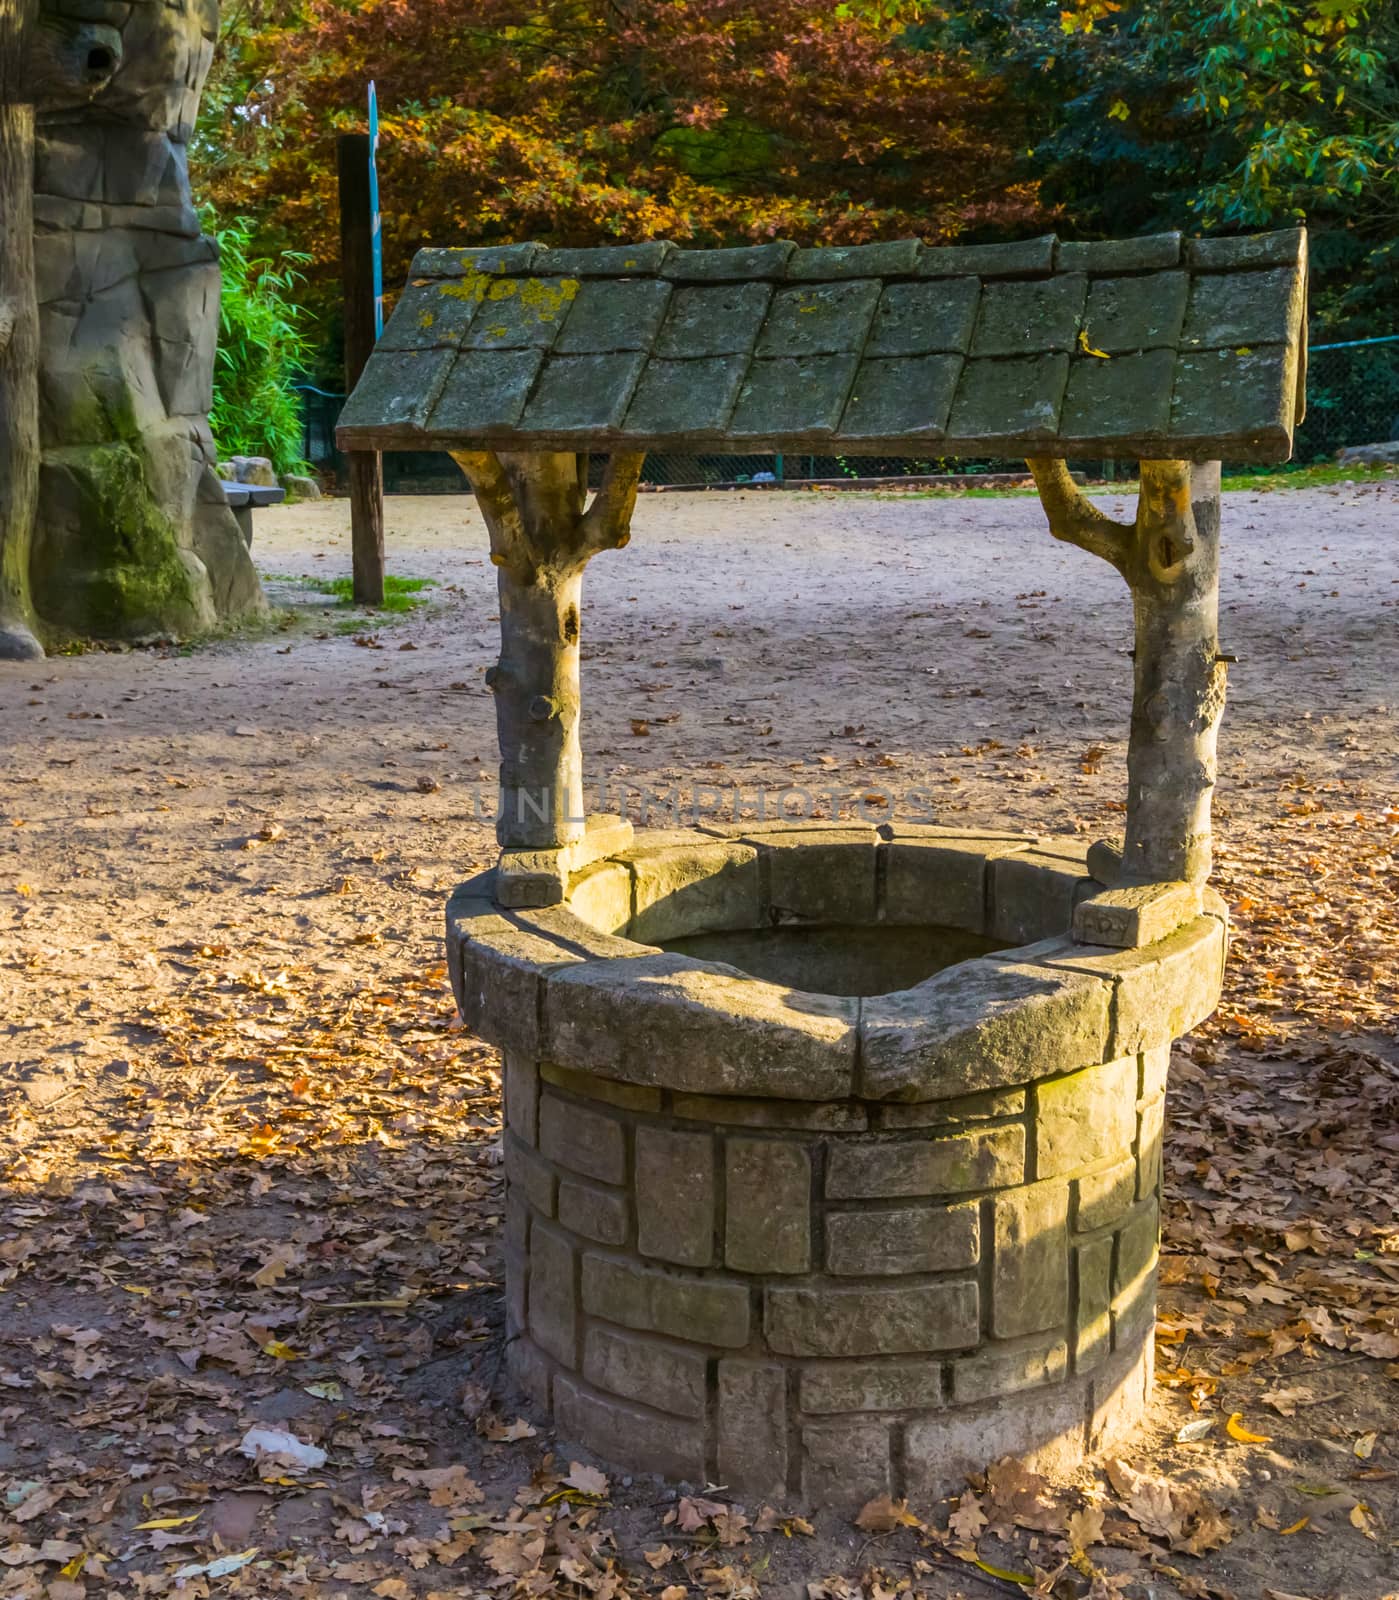 classical water well, medieval looking architecture, historical decorations by charlottebleijenberg